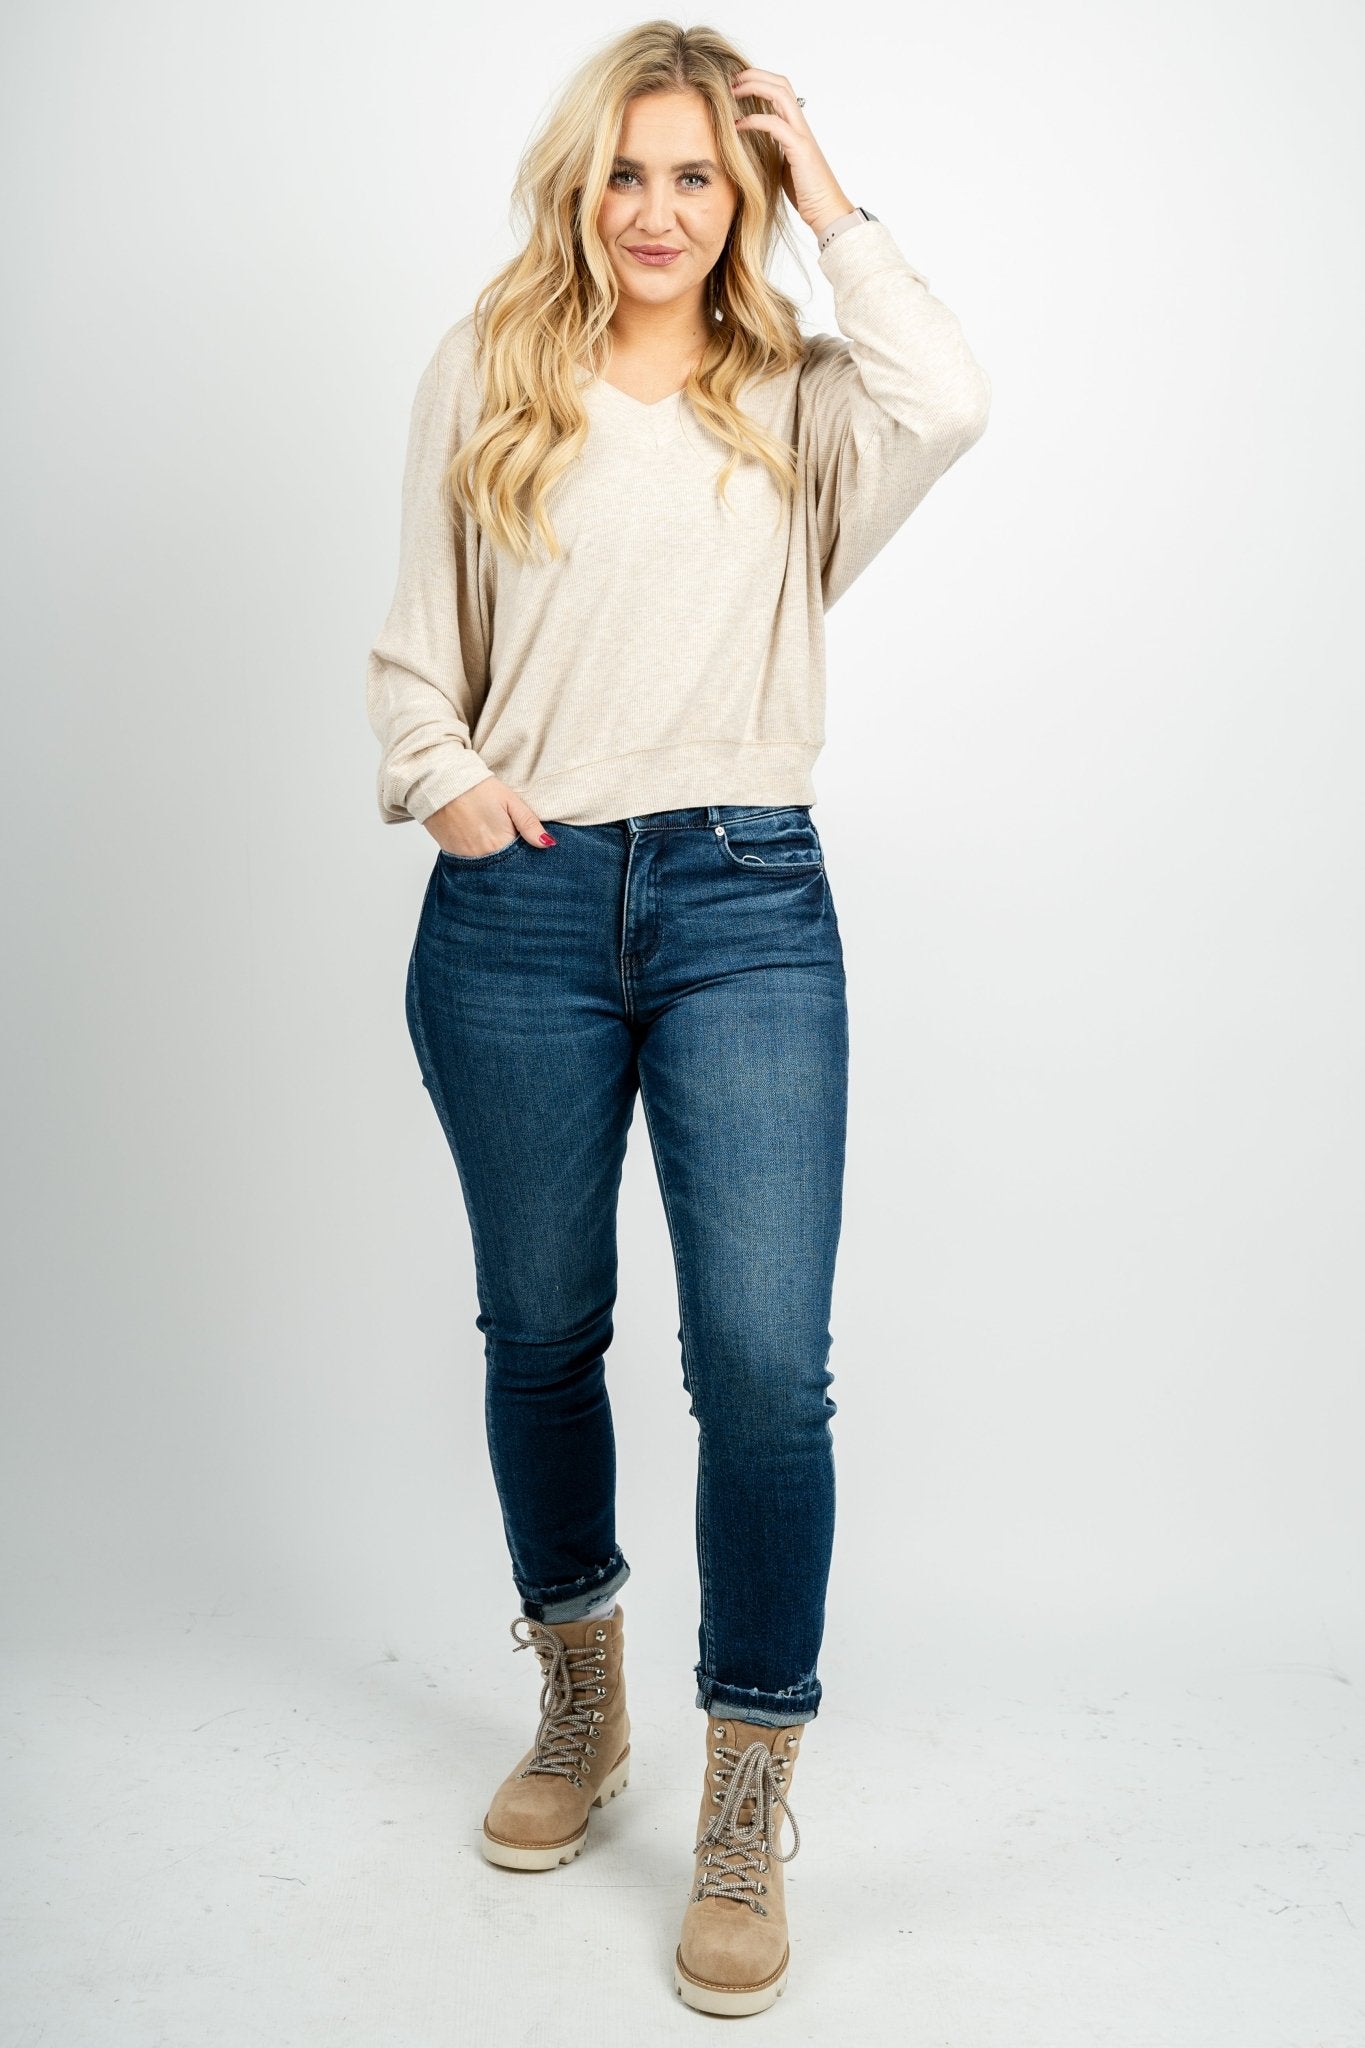 Carly Rib V-Neck in Light Oatmeal - Z Supply Top - Z Supply Clothing at Lush Fashion Lounge Trendy Boutique Oklahoma City